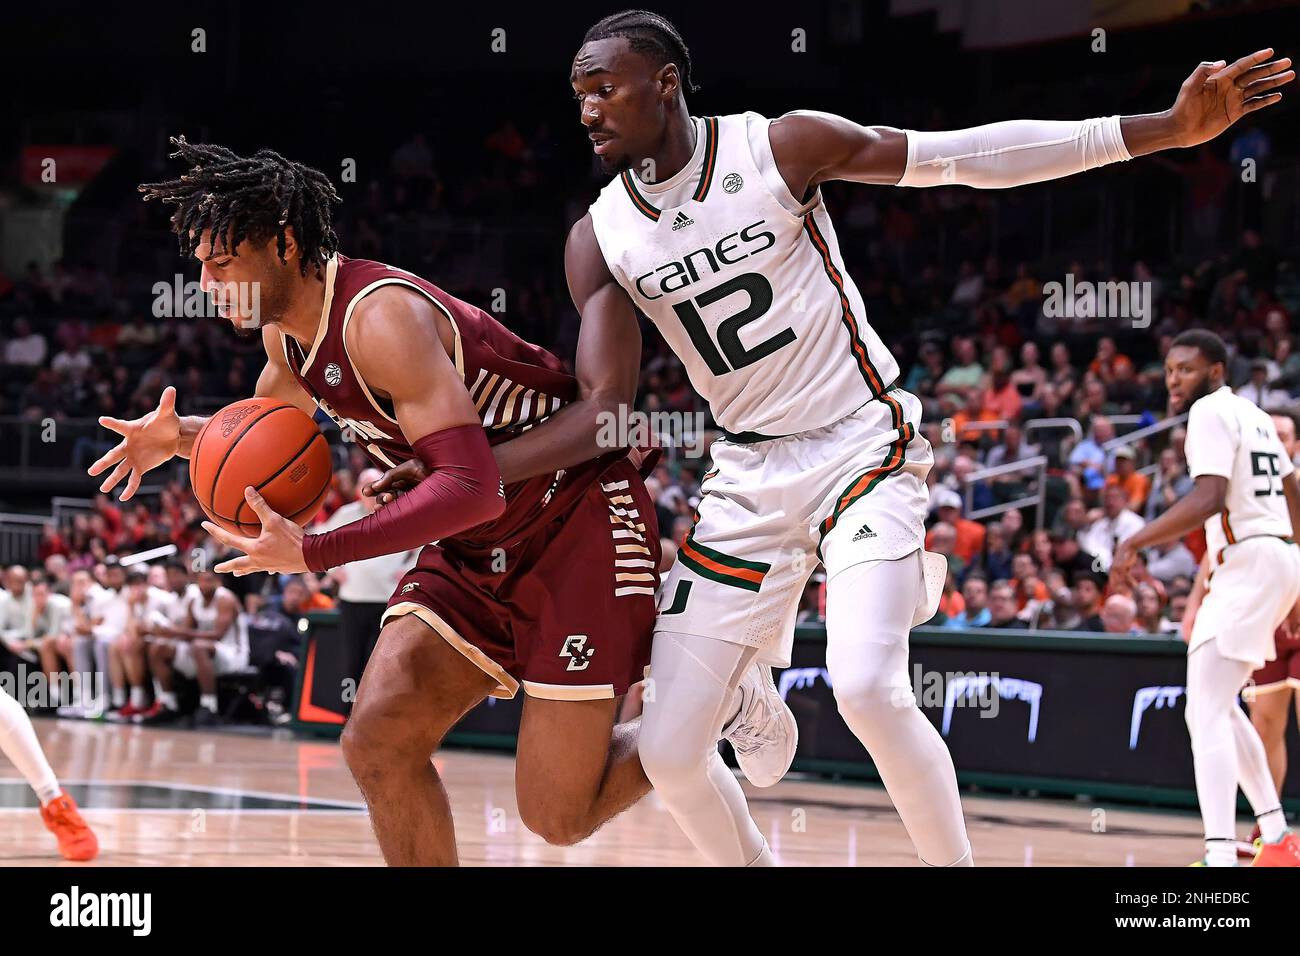 https://c8.alamy.com/comp/2NHEDBC/coral-gables-fl-jan-11-boston-college-forward-tj-bickerstaff-1-beats-miami-center-favour-aire-12-to-a-rebound-in-the-second-half-as-the-miami-hurricanes-faced-the-boston-college-eagles-on-january-11-2023-at-the-watsco-center-in-coral-gables-florida-photo-by-samuel-lewisicon-sportswire-icon-sportswire-via-ap-images-2NHEDBC.jpg